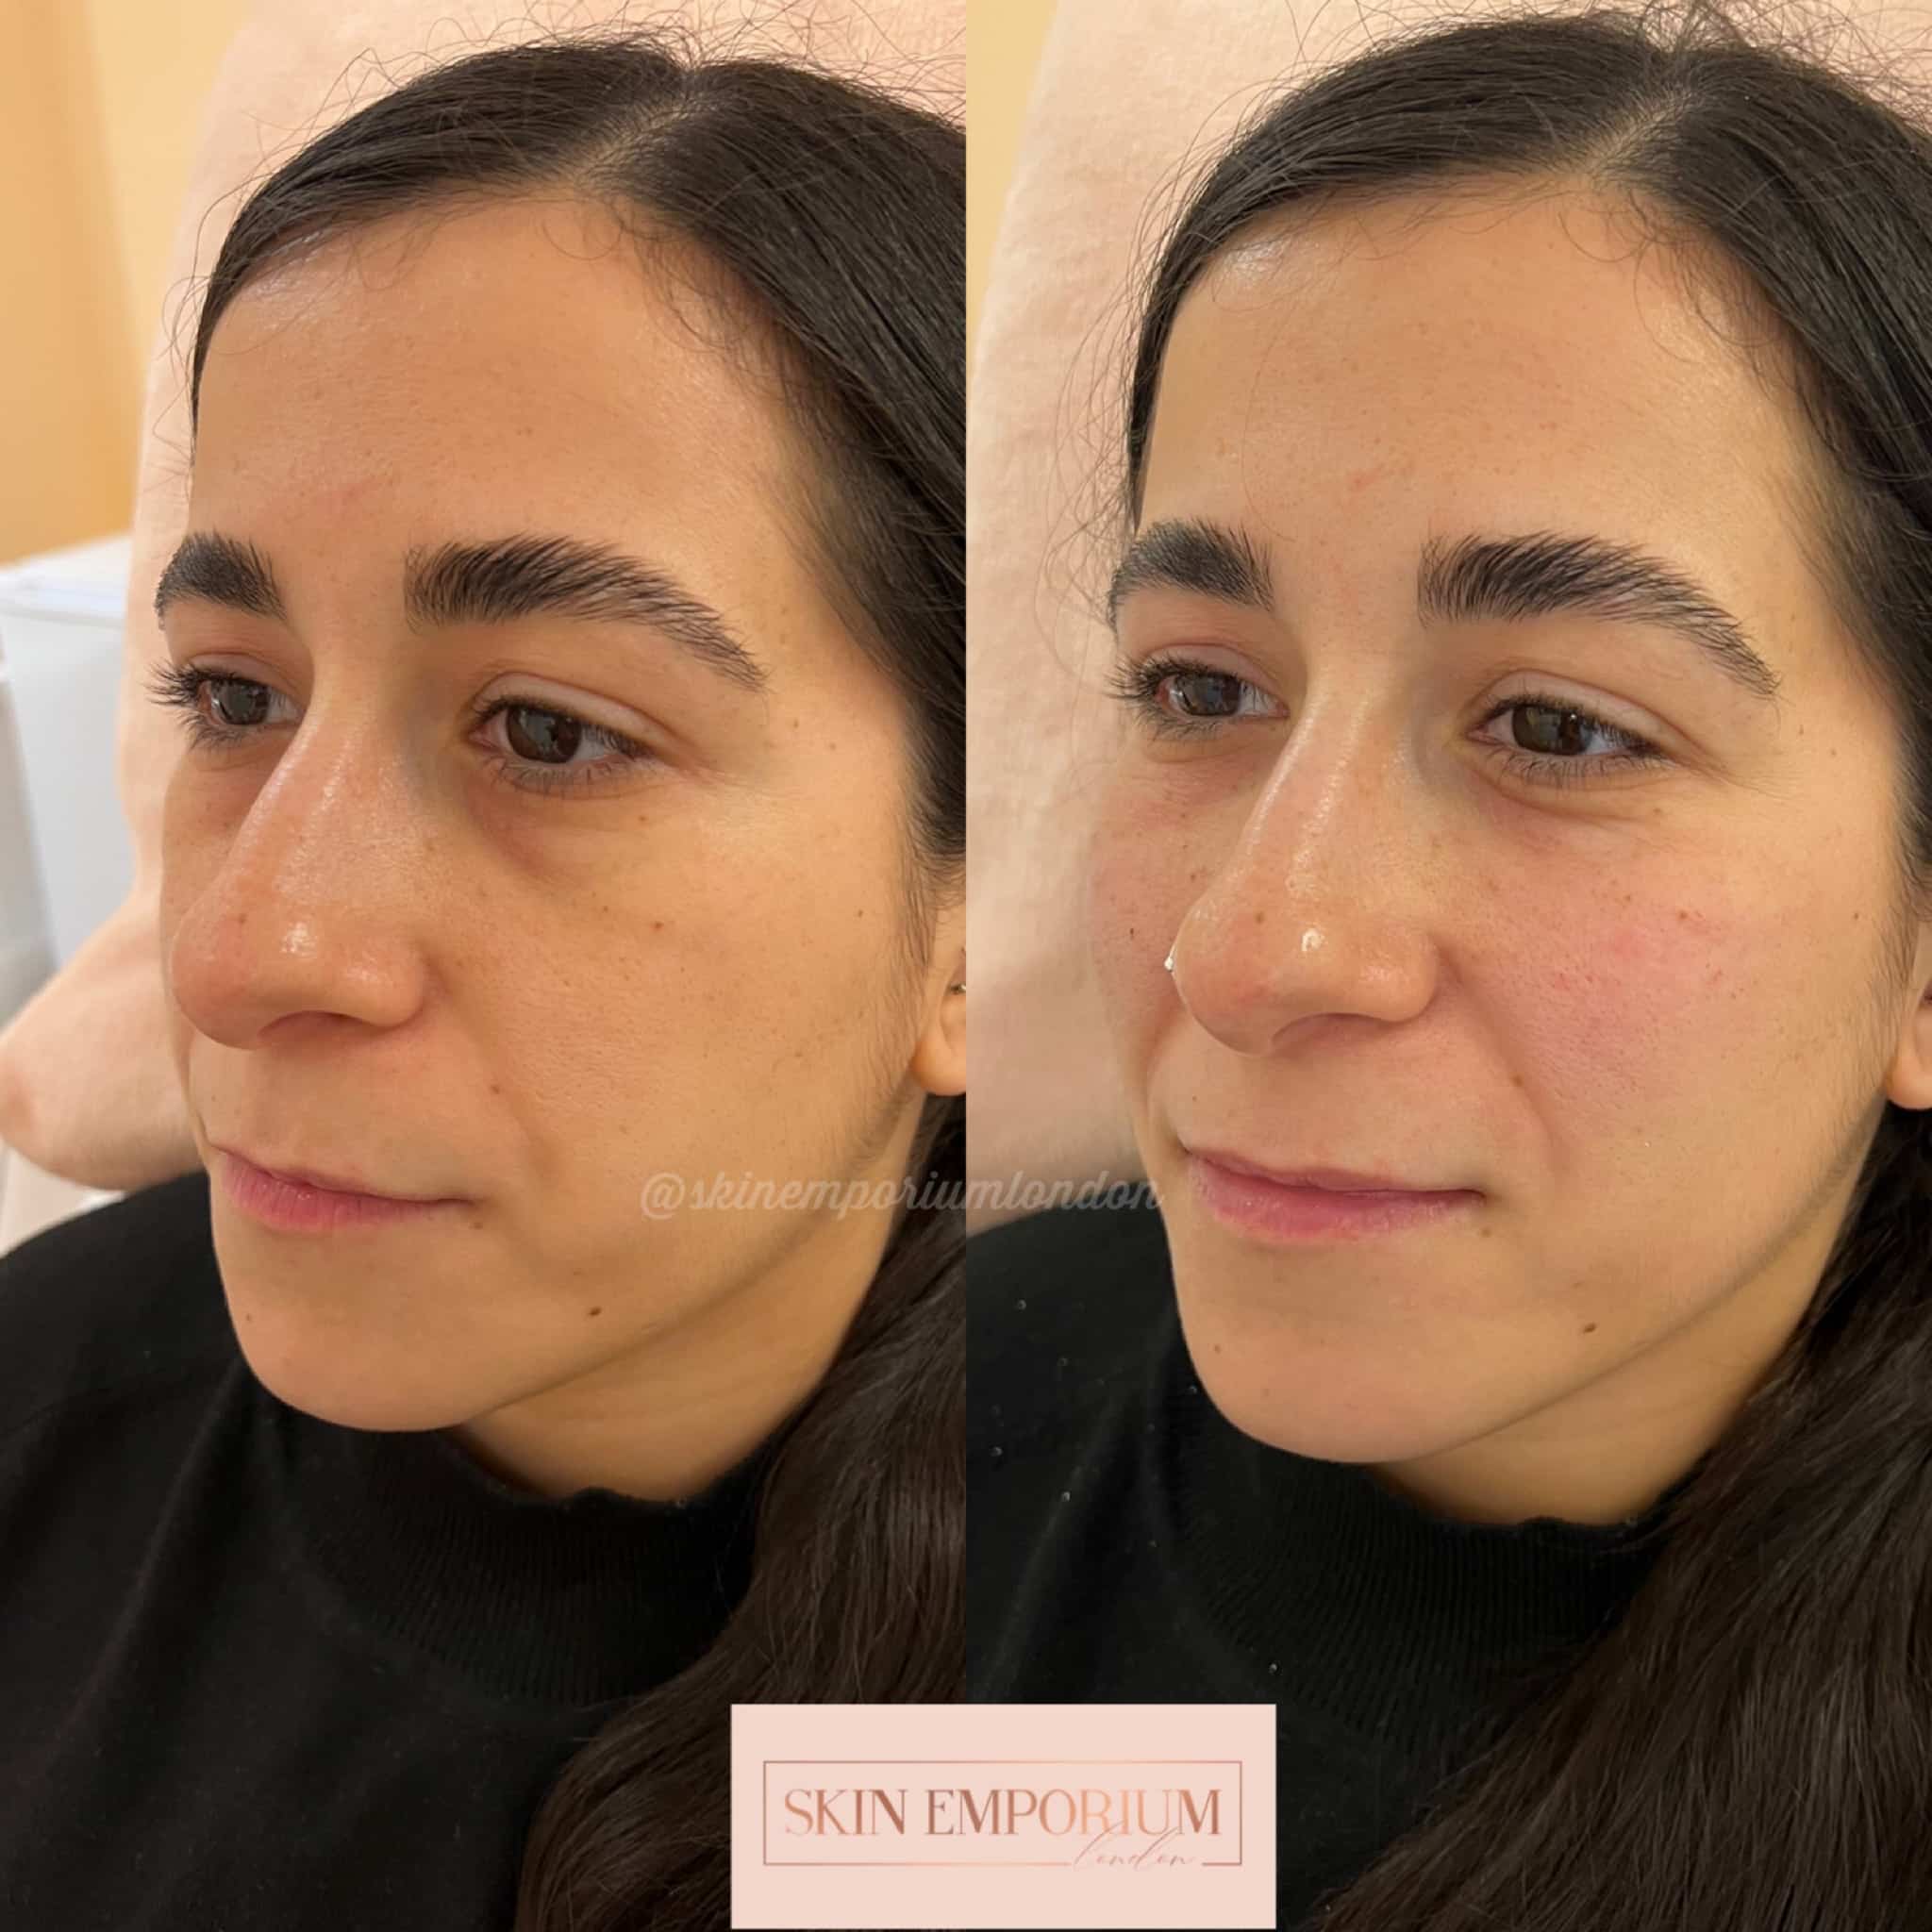 Before and after photo of a women having received cheek filler treatment at the Skin Emporium in Clapham, London.